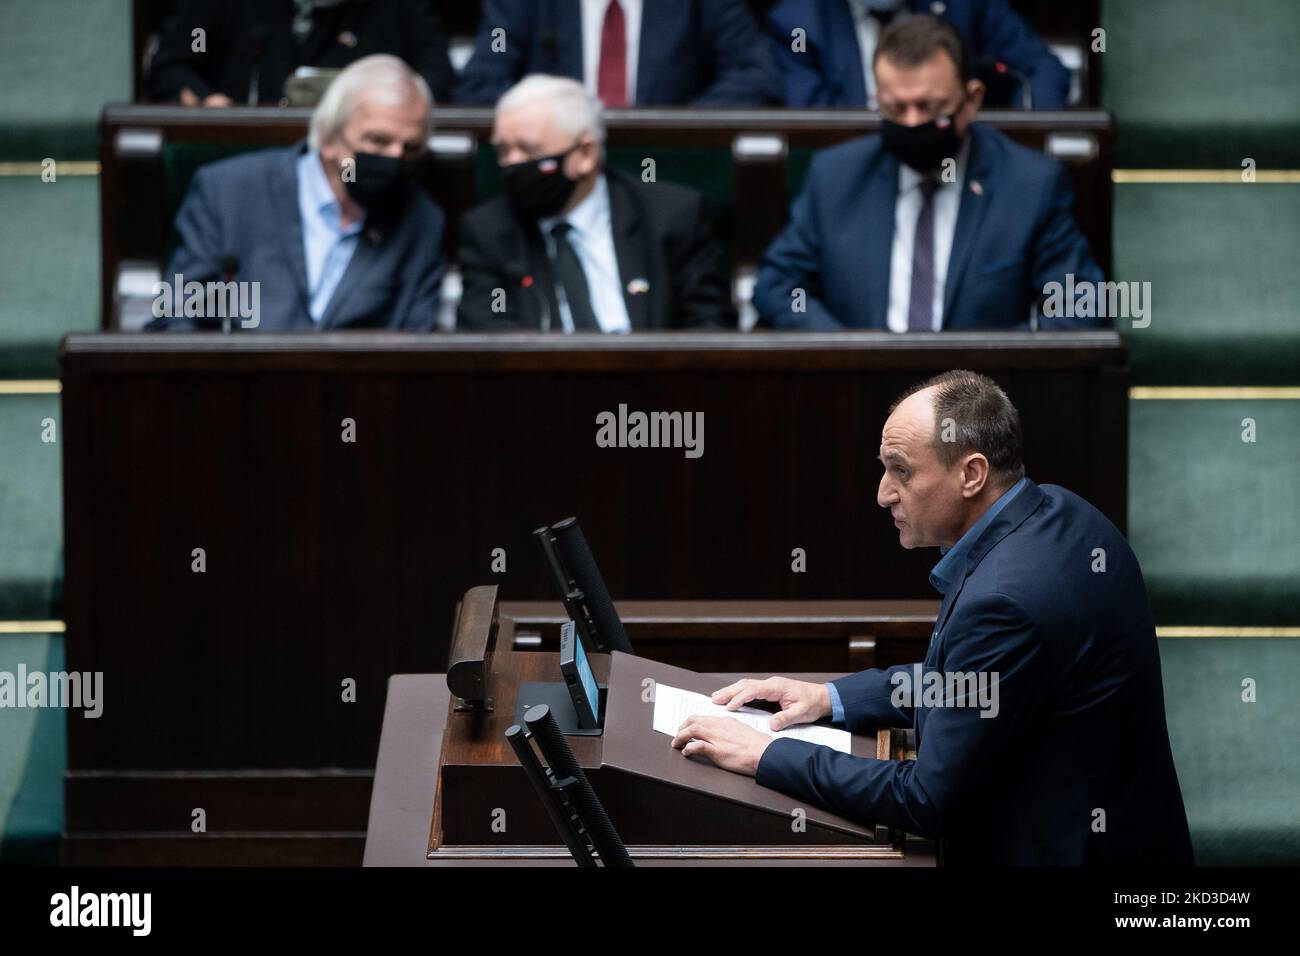 Leader of the Polish Law and Justice (PiS) ruling party Jaroslaw Kaczynski (C), Polish Deputy Sejm Speaker Ryszard Terlecki (L) and Polish Defense Minister Mariusz Blaszczak (R) and Leader of Kukiz'15 Pawel Kukiz (Front), during the 49th session of the Sejm (lower house) in Warsaw, Poland, on 24 February 2022. Polish Parliament has passed a resolution condemning Russian aggression against Ukraine and calling on the international community to impose tough sanctions on Moscow. (Photo by Mateusz Wlodarczyk/NurPhoto) Stock Photo